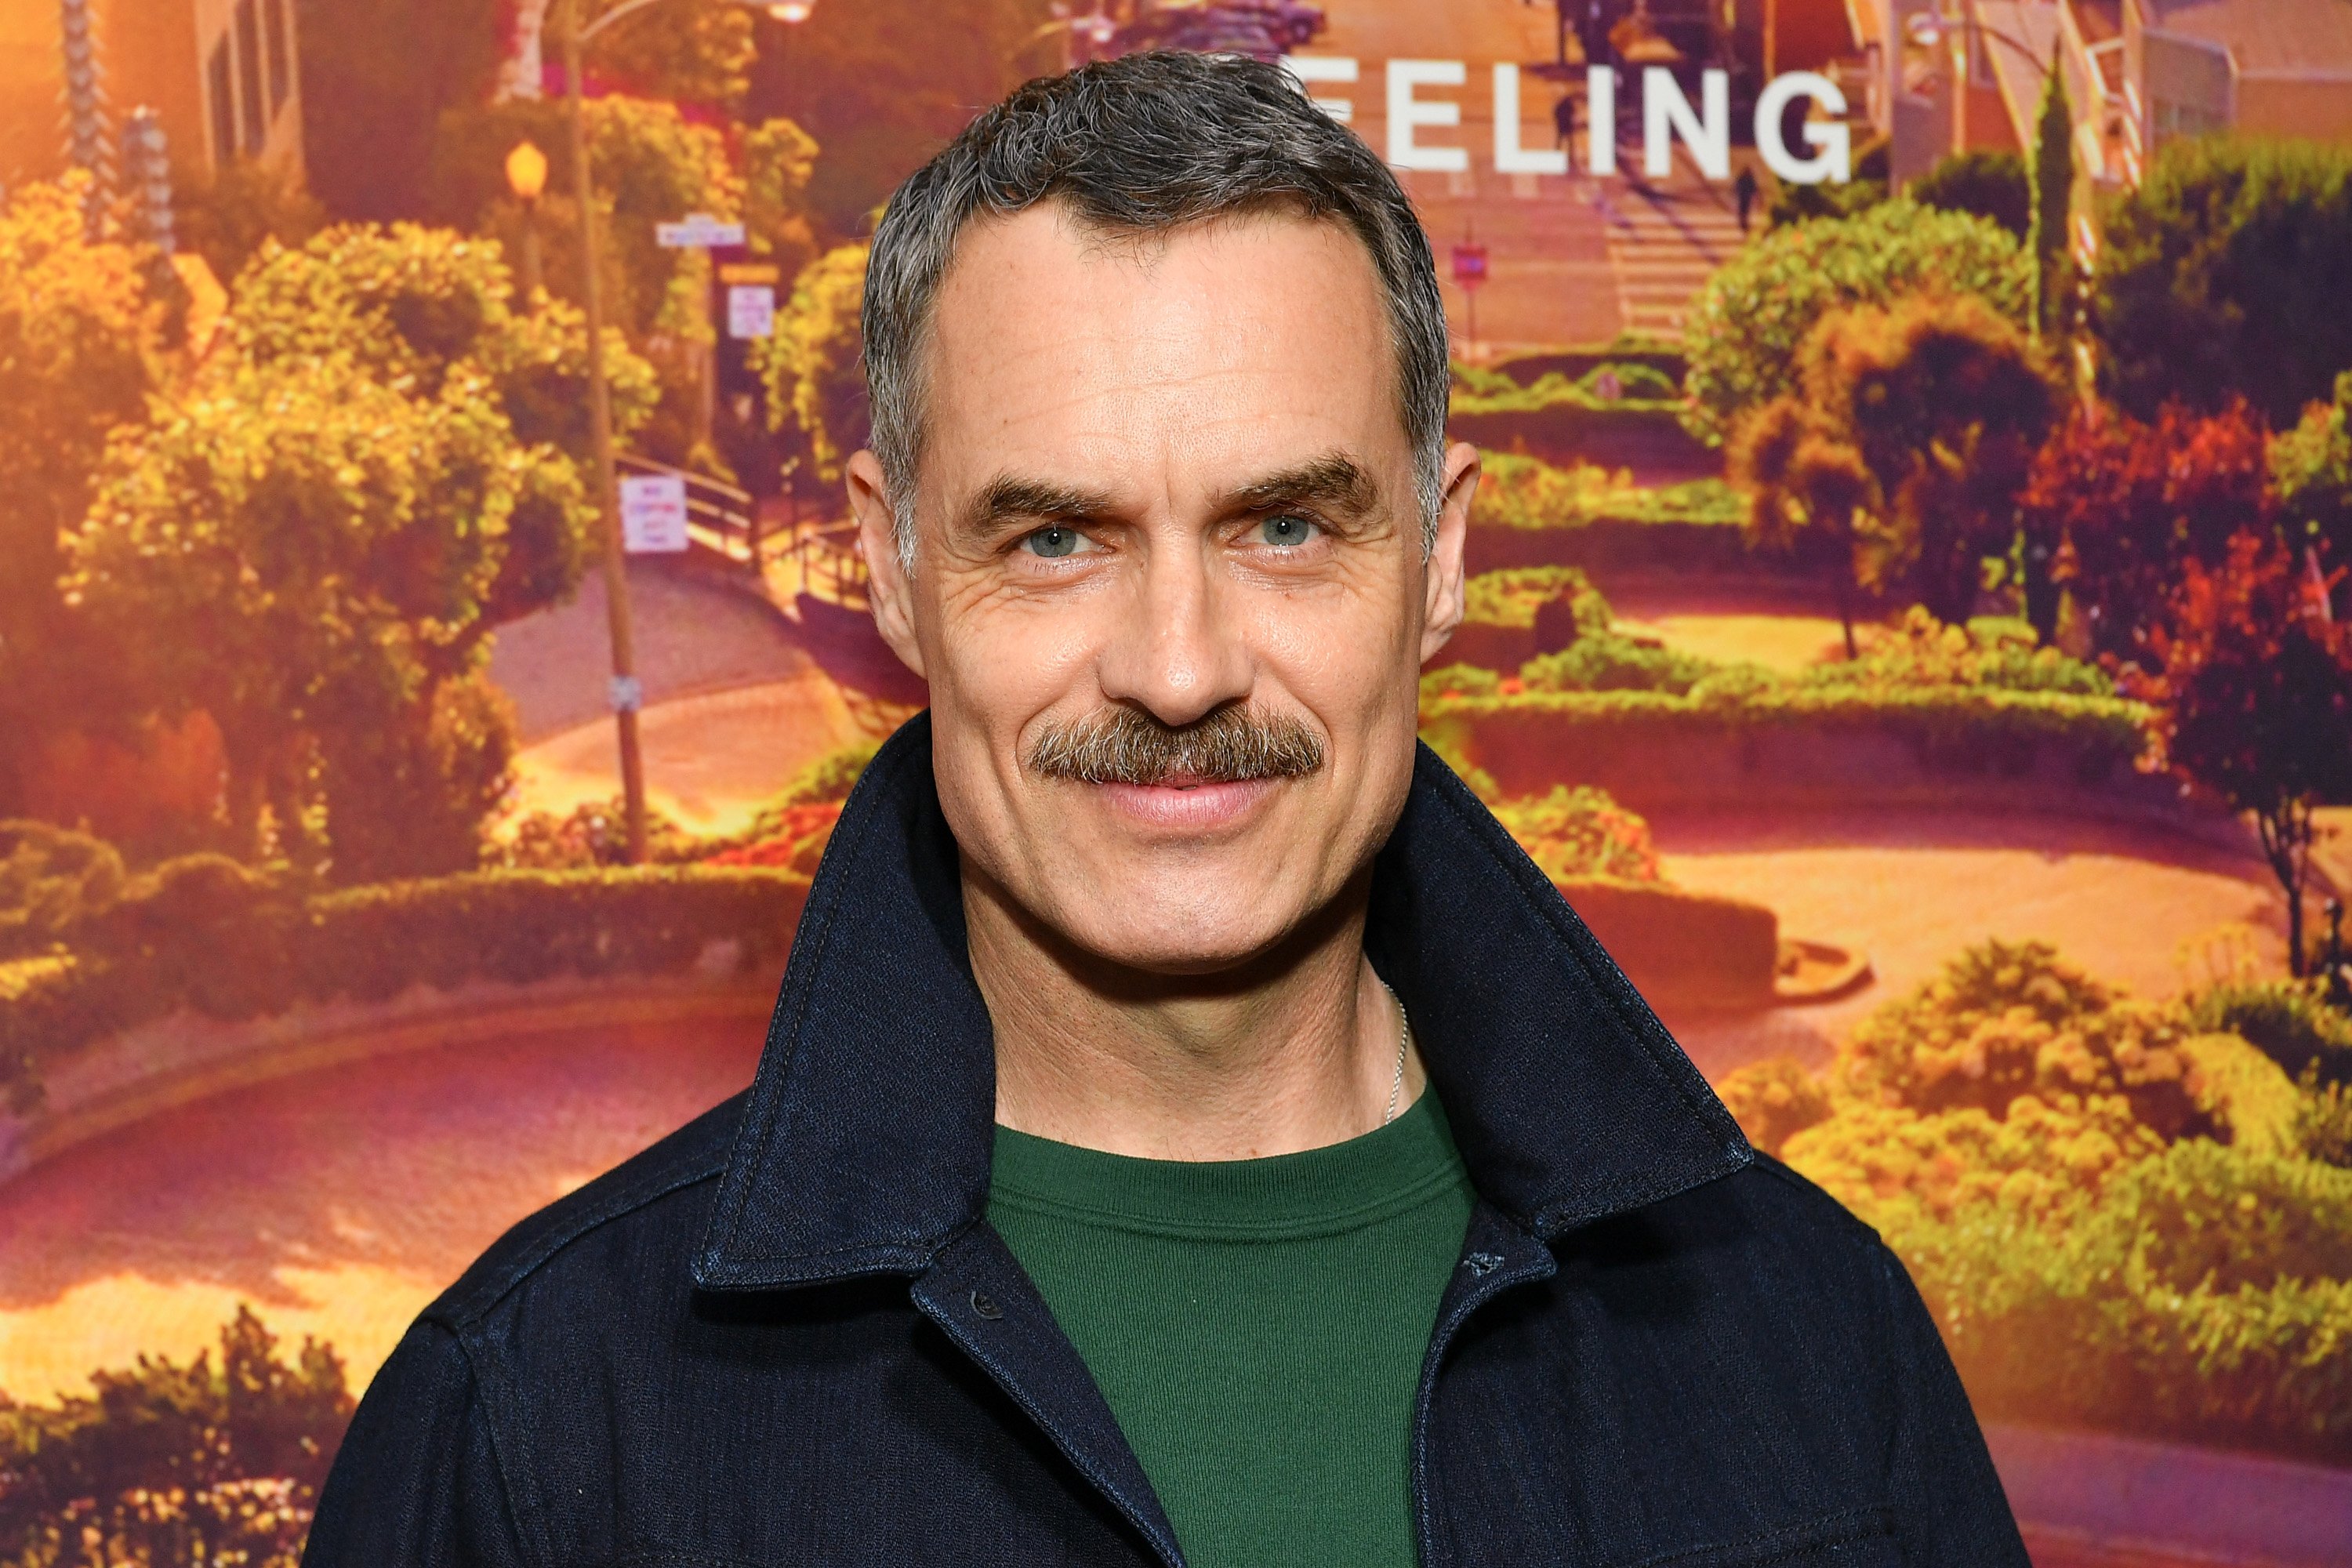 Murray Bartlett in a green shirt and black jacket.